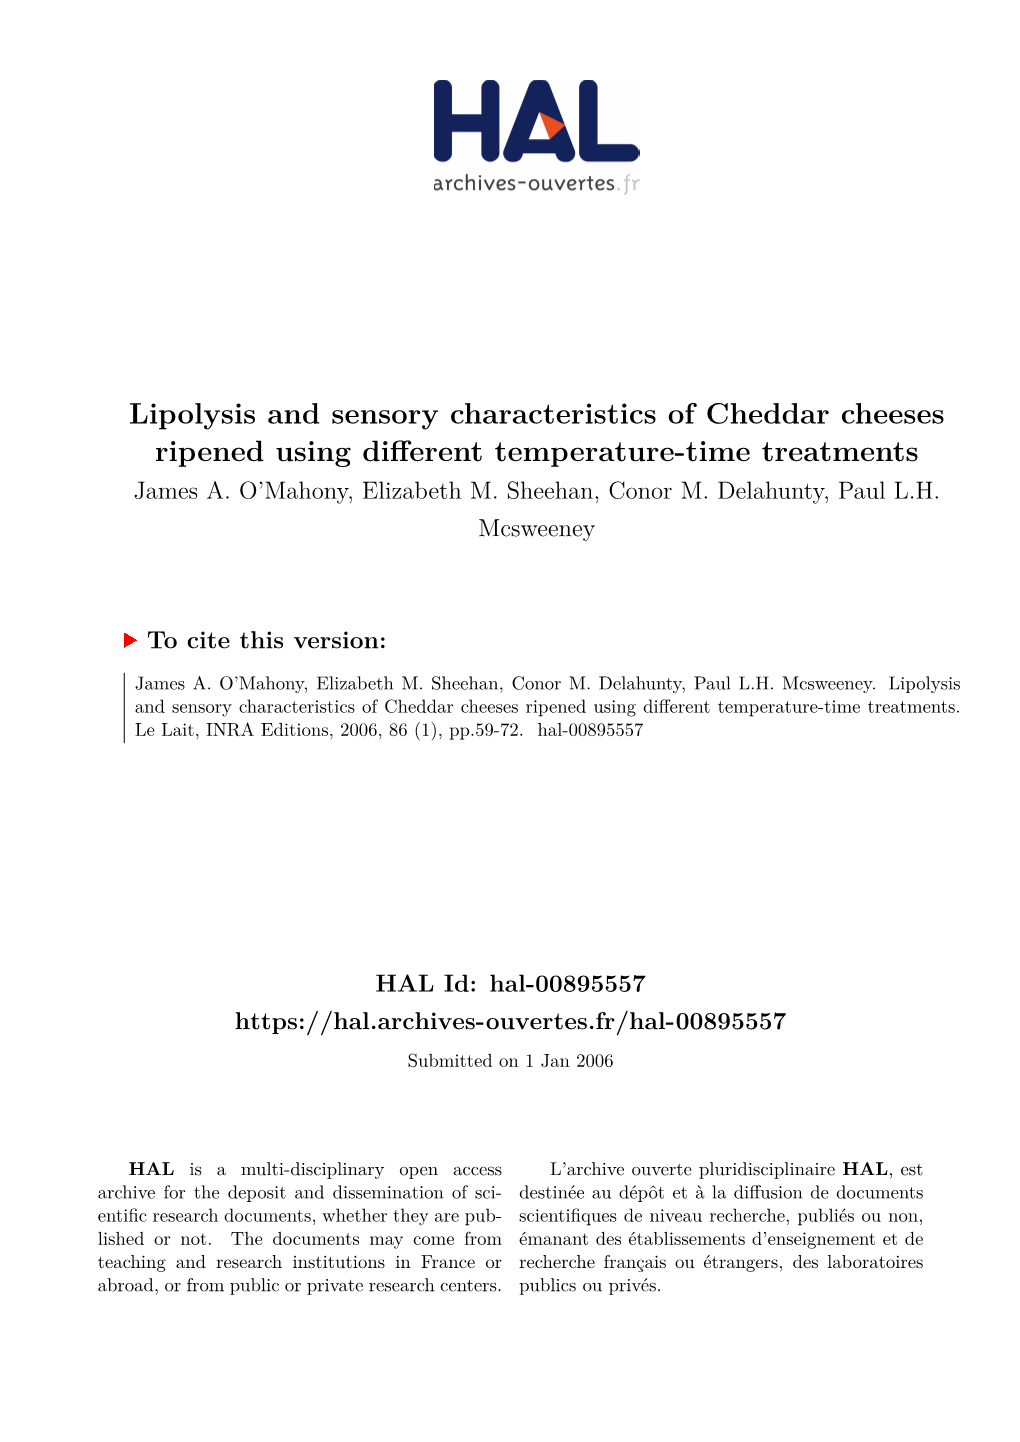 Lipolysis and Sensory Characteristics of Cheddar Cheeses Ripened Using Different Temperature-Time Treatments James A